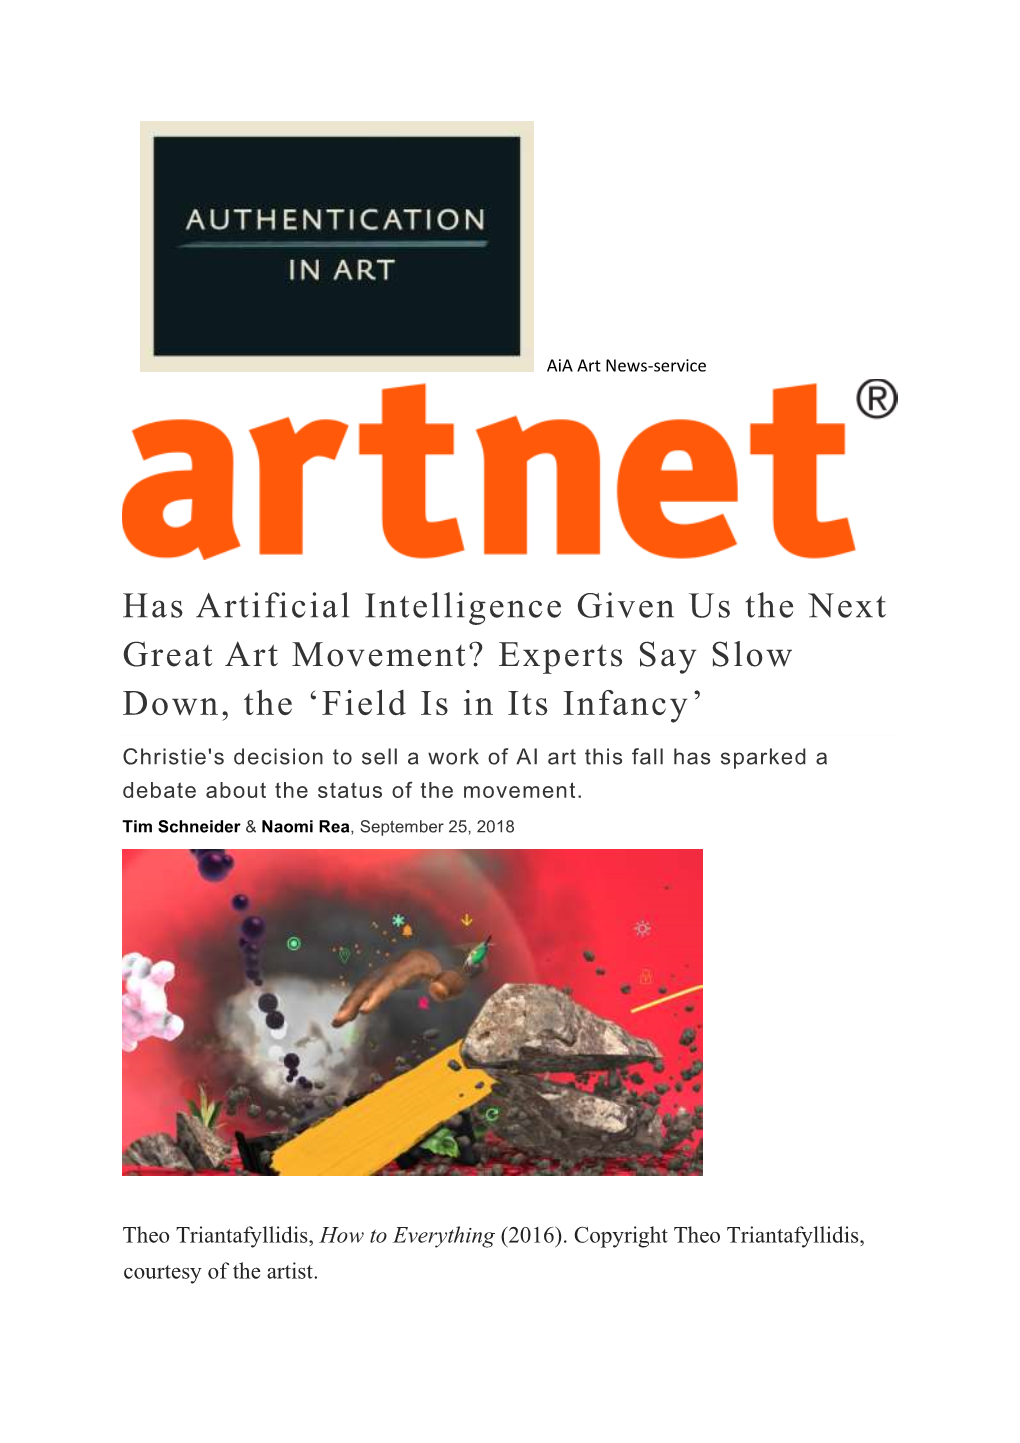 Has Artificial Intelligence Given Us the Next Great Art Movement? Experts Say Slow Down, the 'Field Is in Its Infancy'